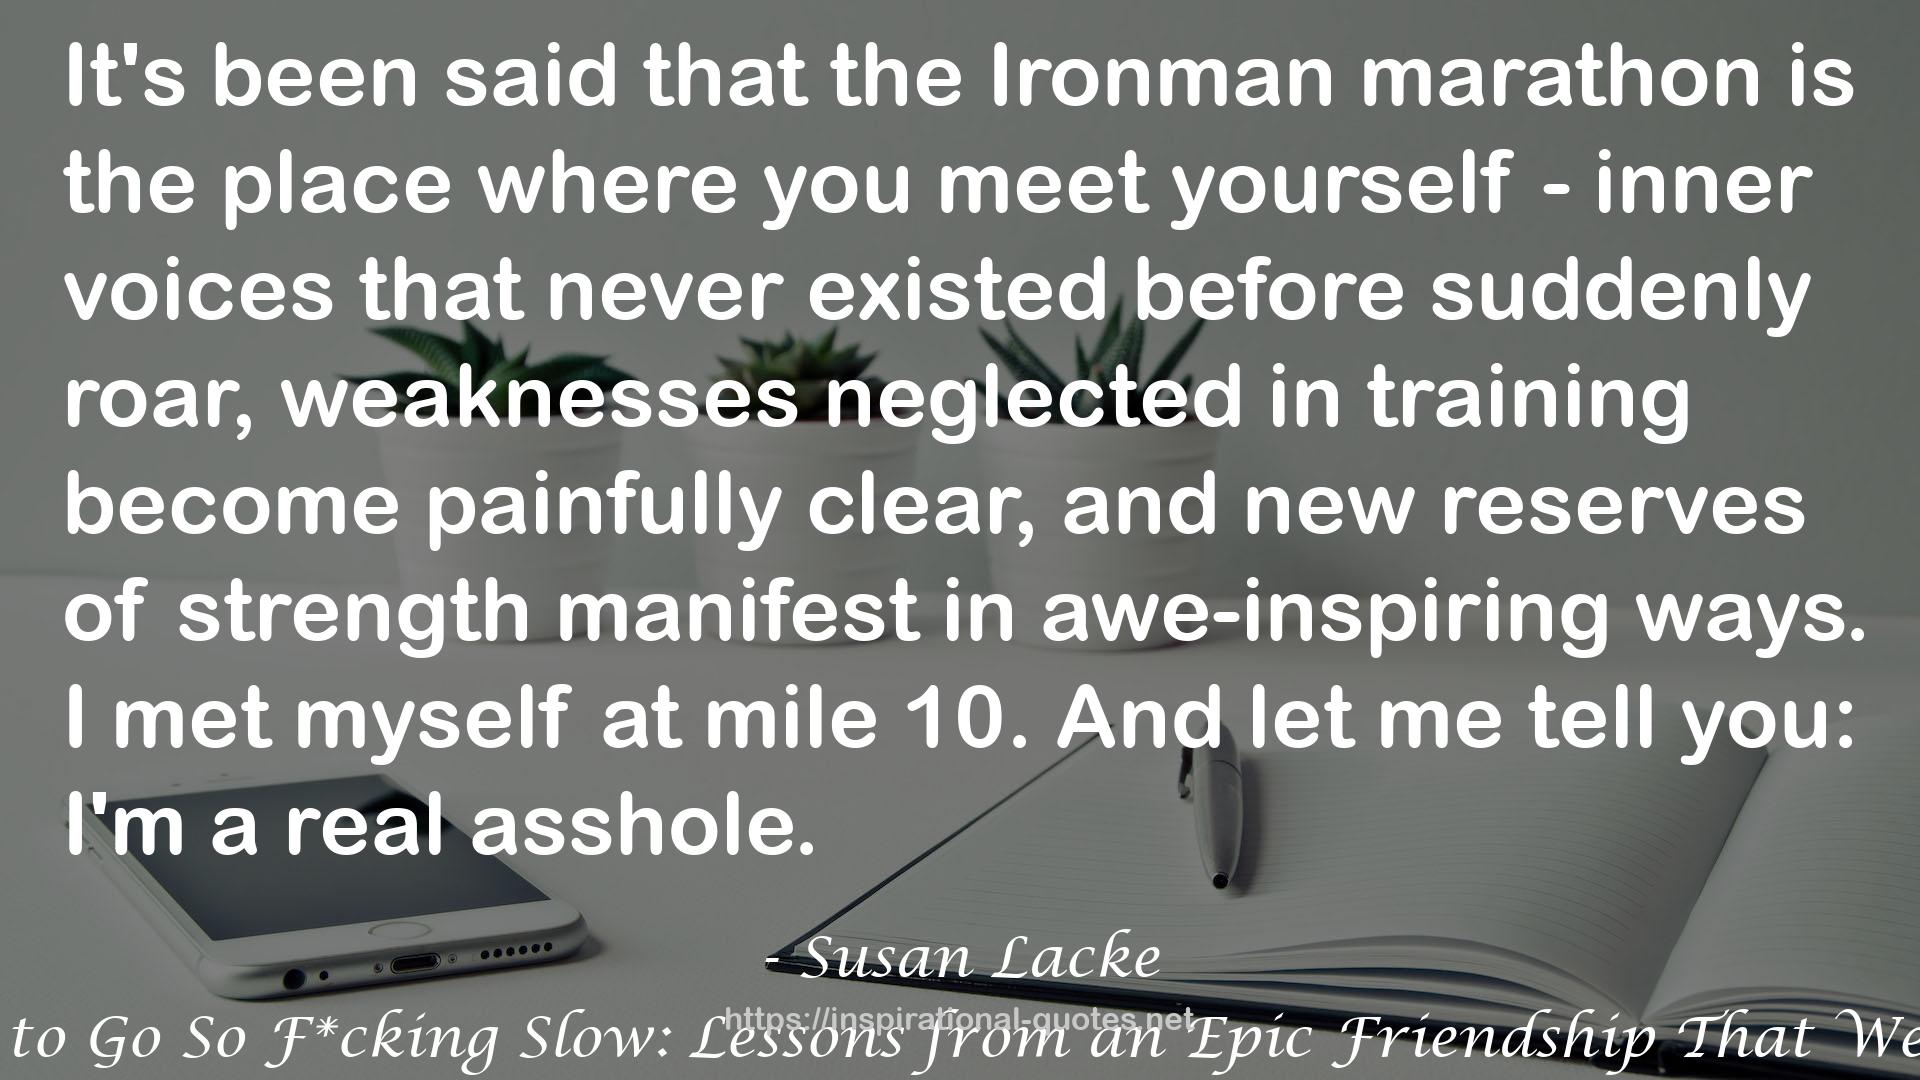 Life's Too Short to Go So F*cking Slow: Lessons from an Epic Friendship That Went the Distance QUOTES